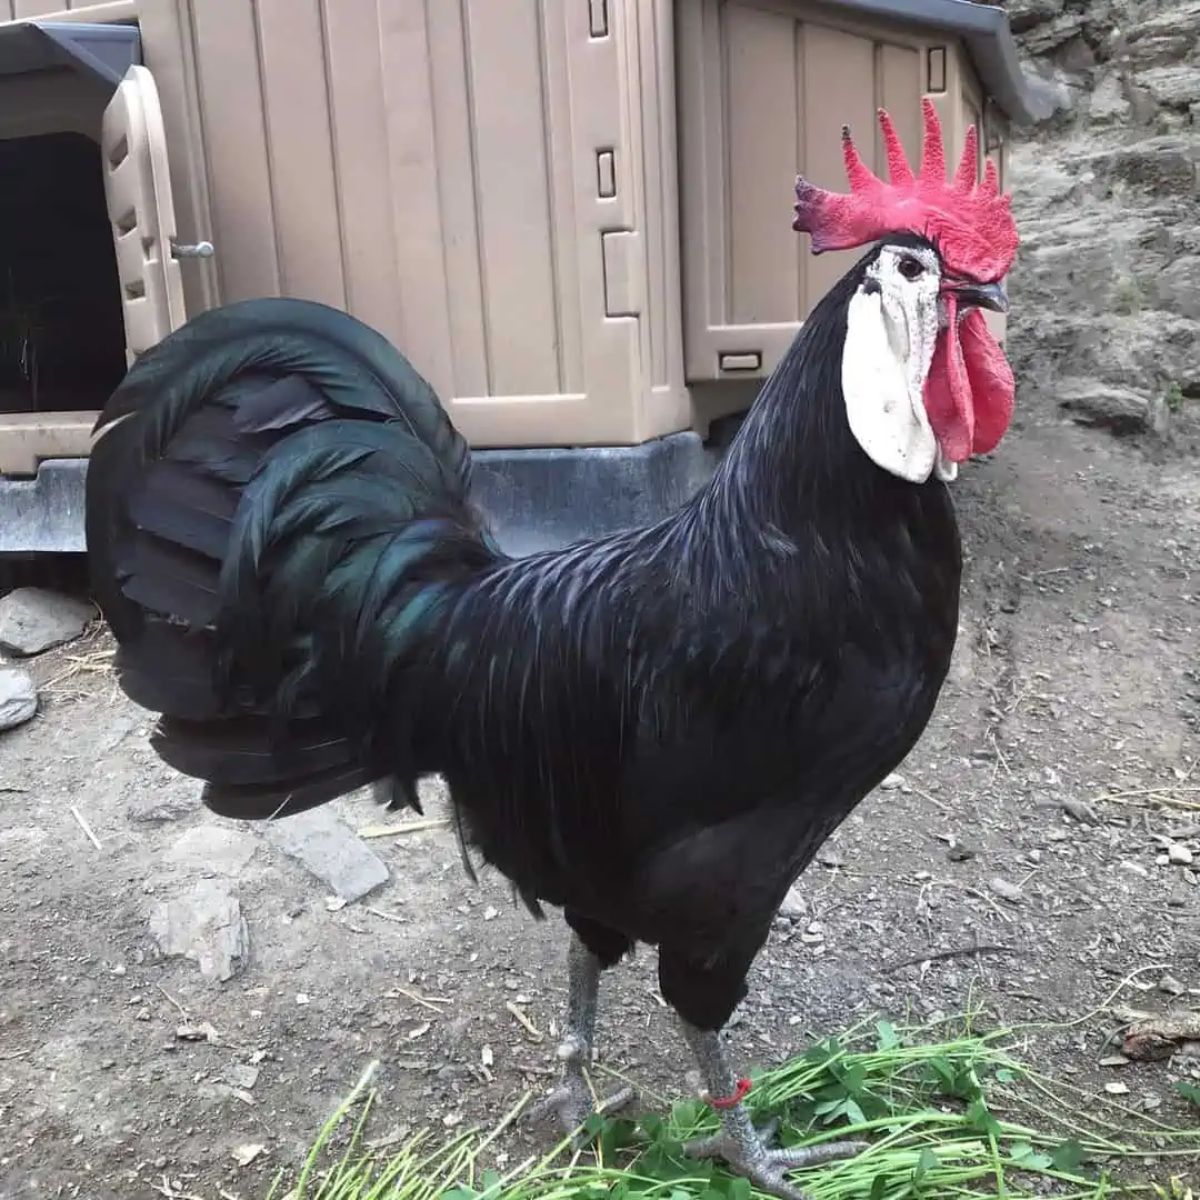 A White Faced Black Spanish rooster near a chicken coop.